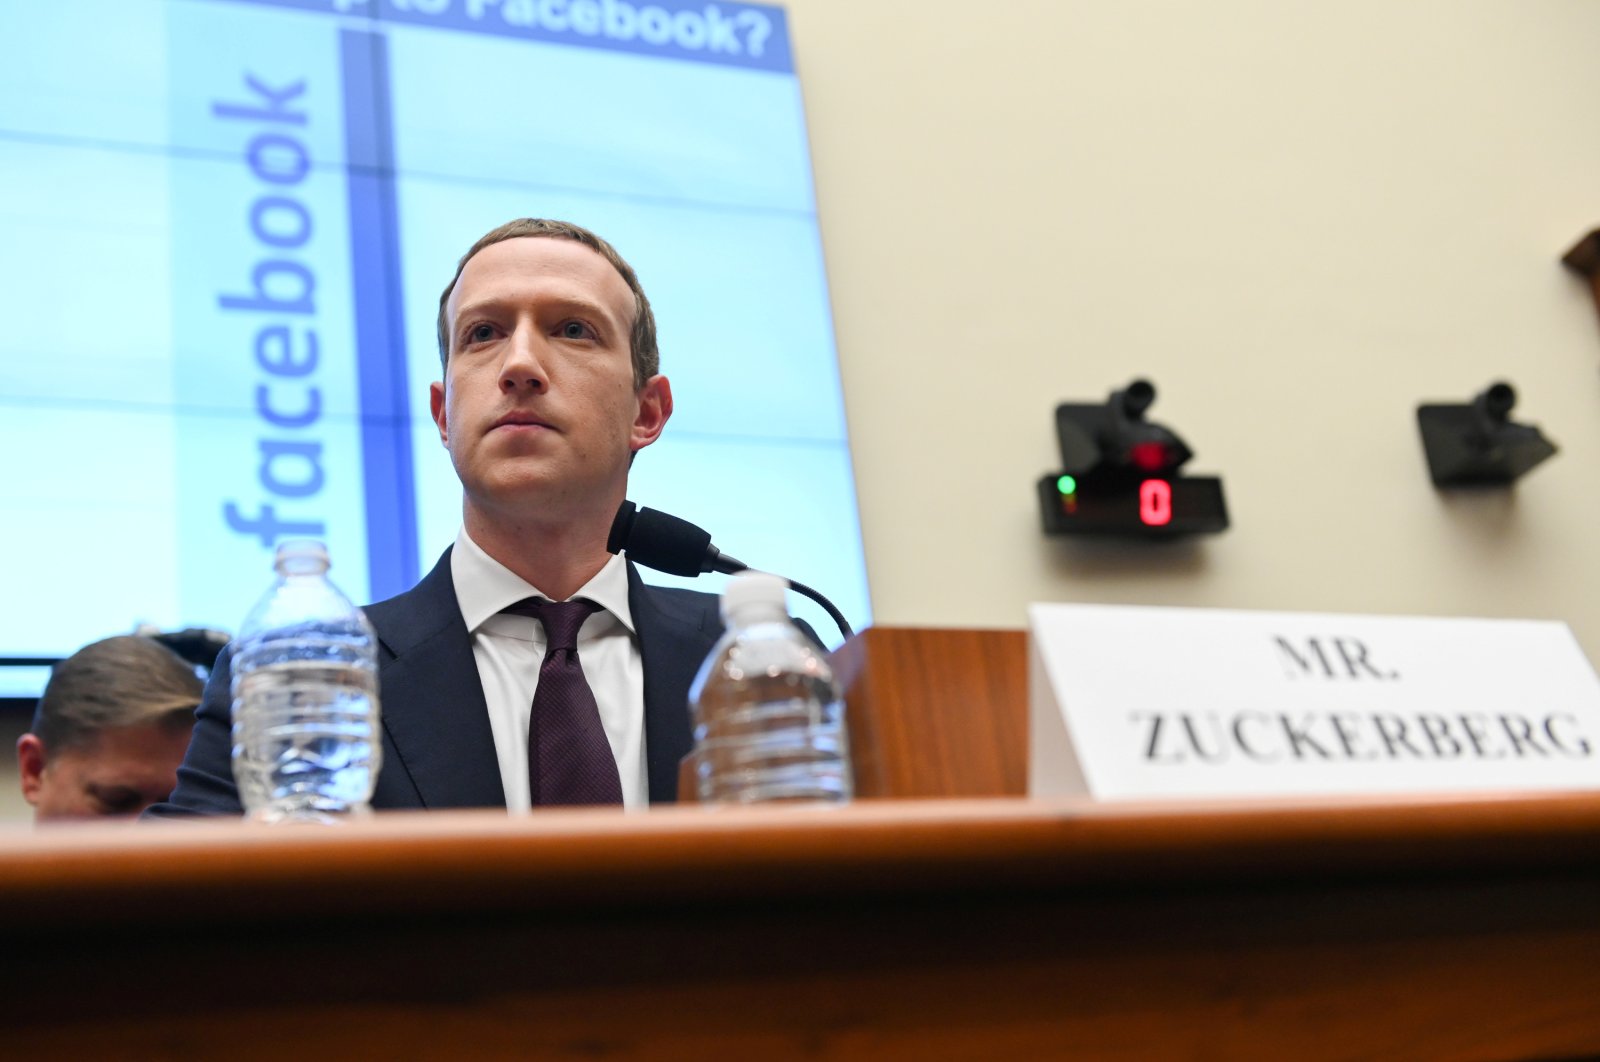 Facebook Chairman and CEO Mark Zuckerberg testifies at a House Financial Services Committee hearing in Washington, Oct. 23, 2019. (Reuters Photo)